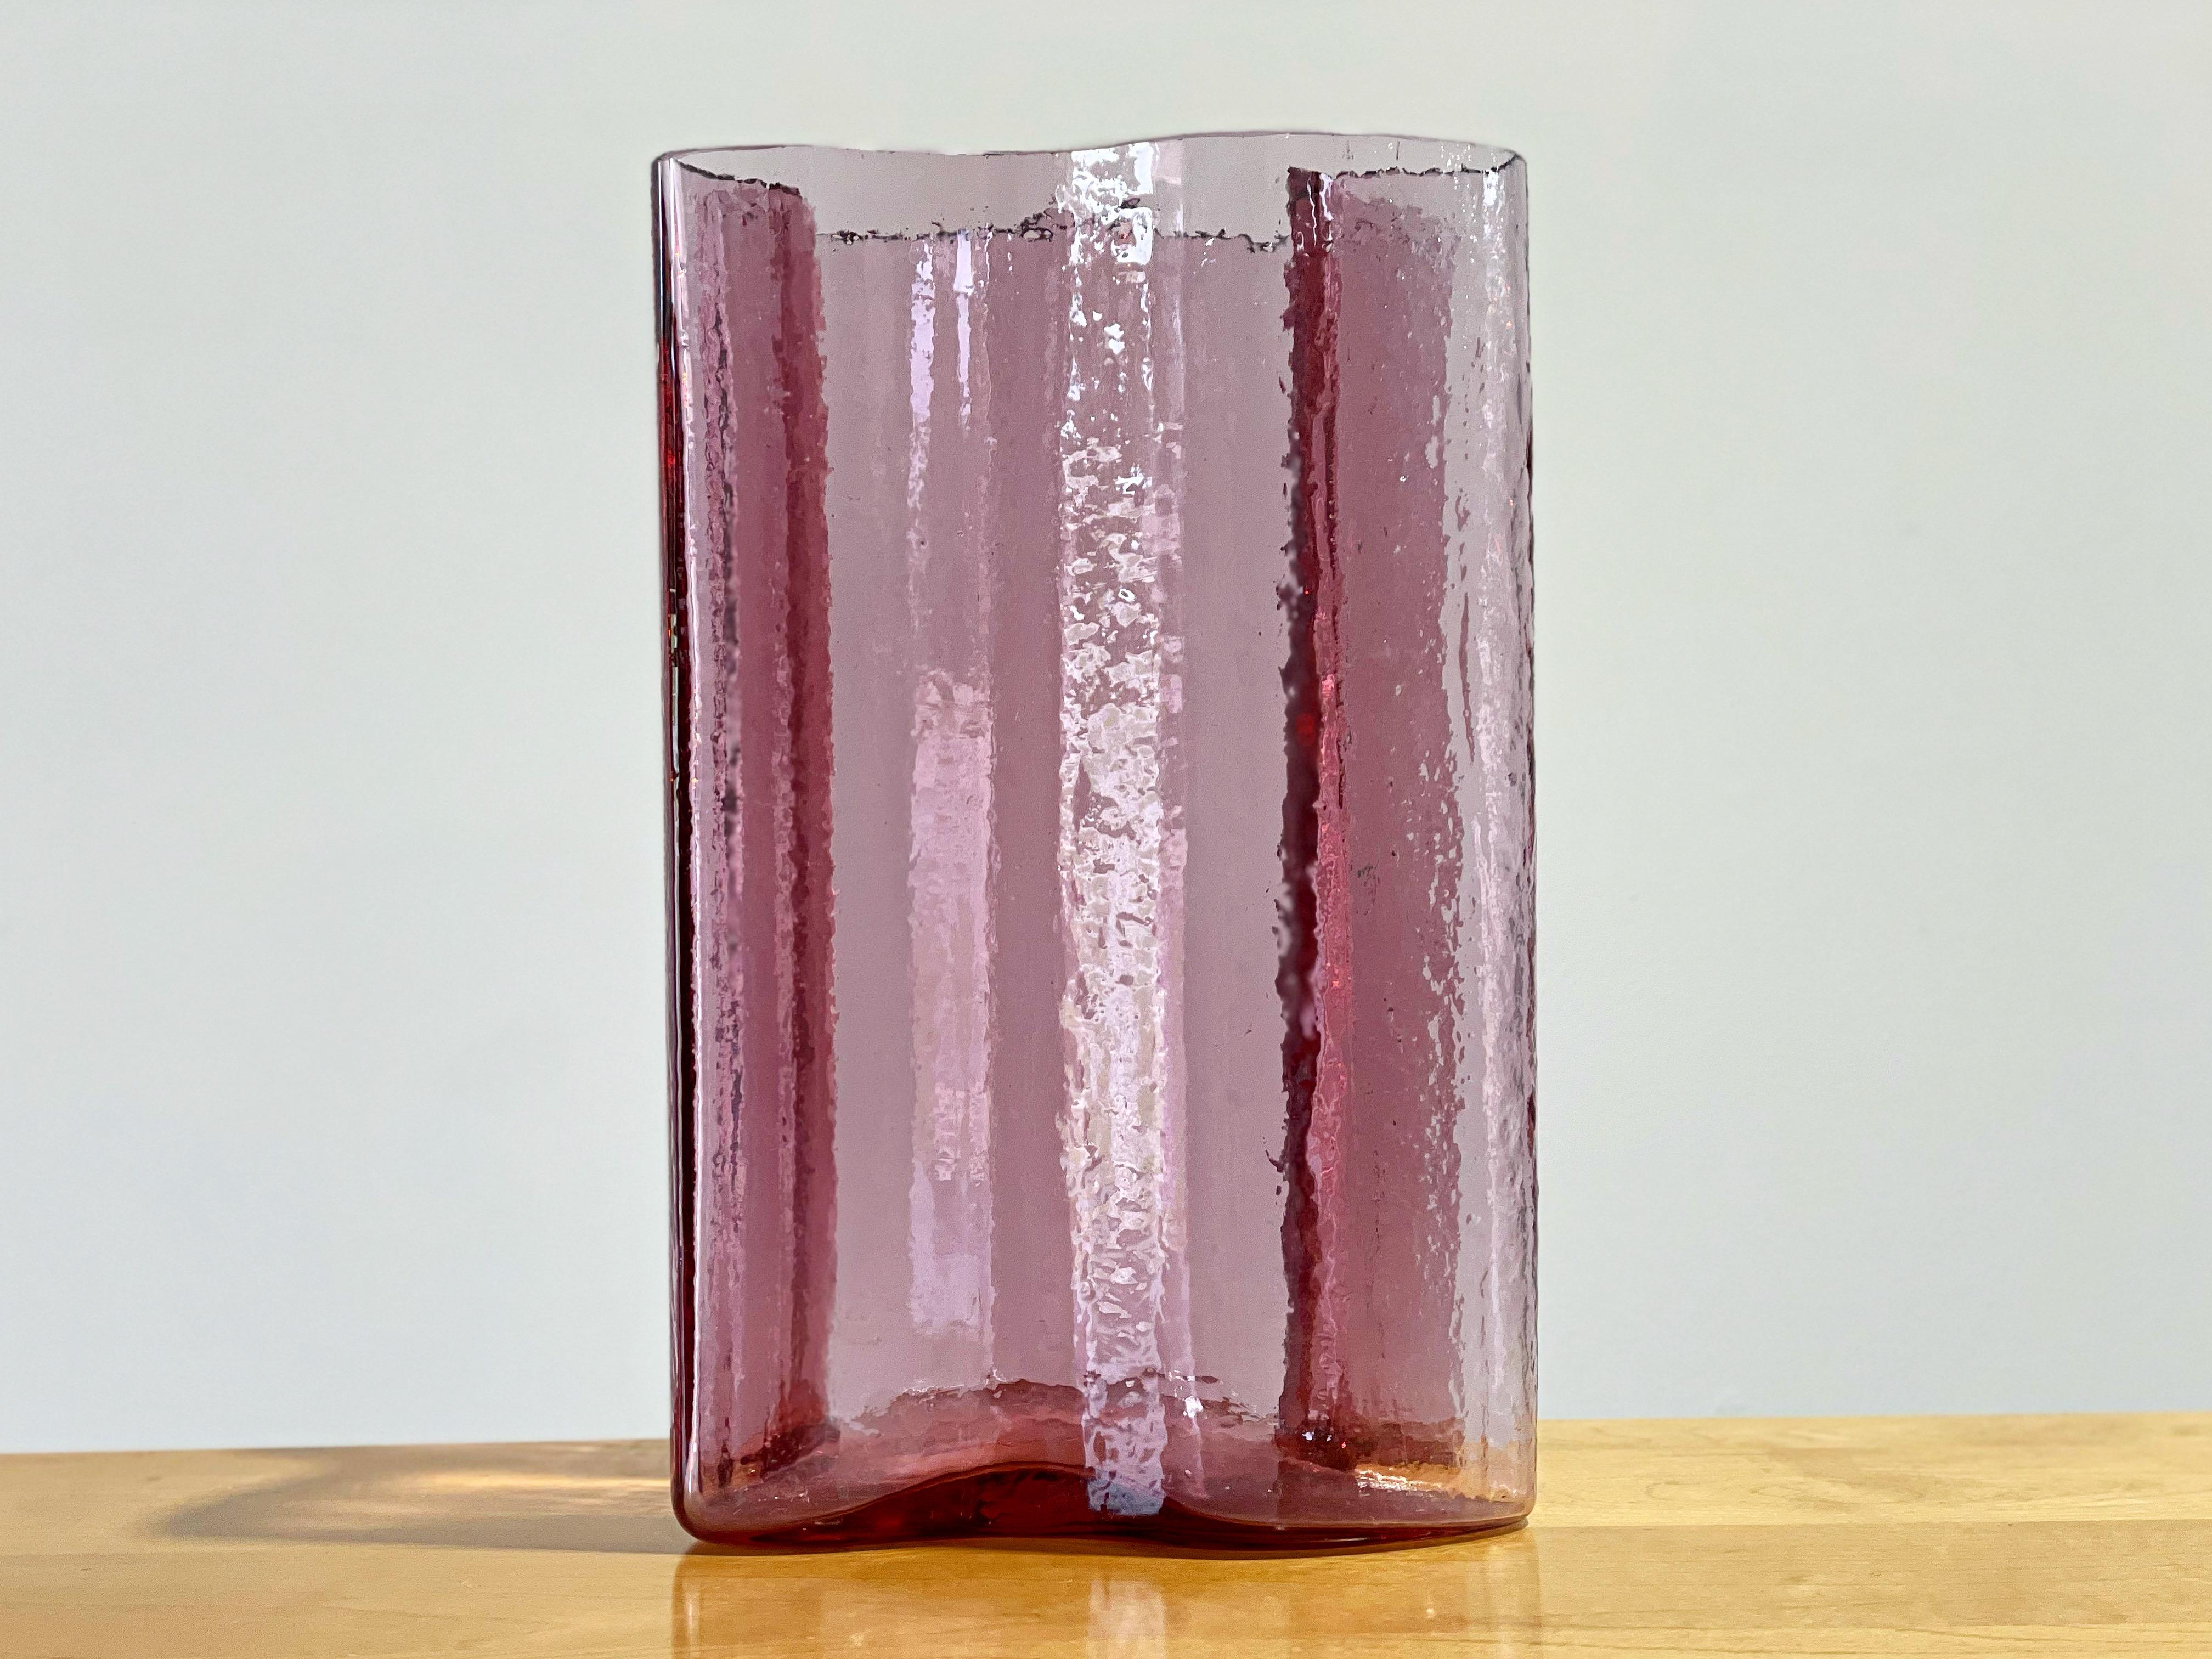 Exceptional Blenko art glass vase model 6312L in rare Rosé colorway. This example is unique on the market. The Rosé color was offered for only two years - 1963 and 1964. Exquisite and flawless condition - no issues whatsoever.
 